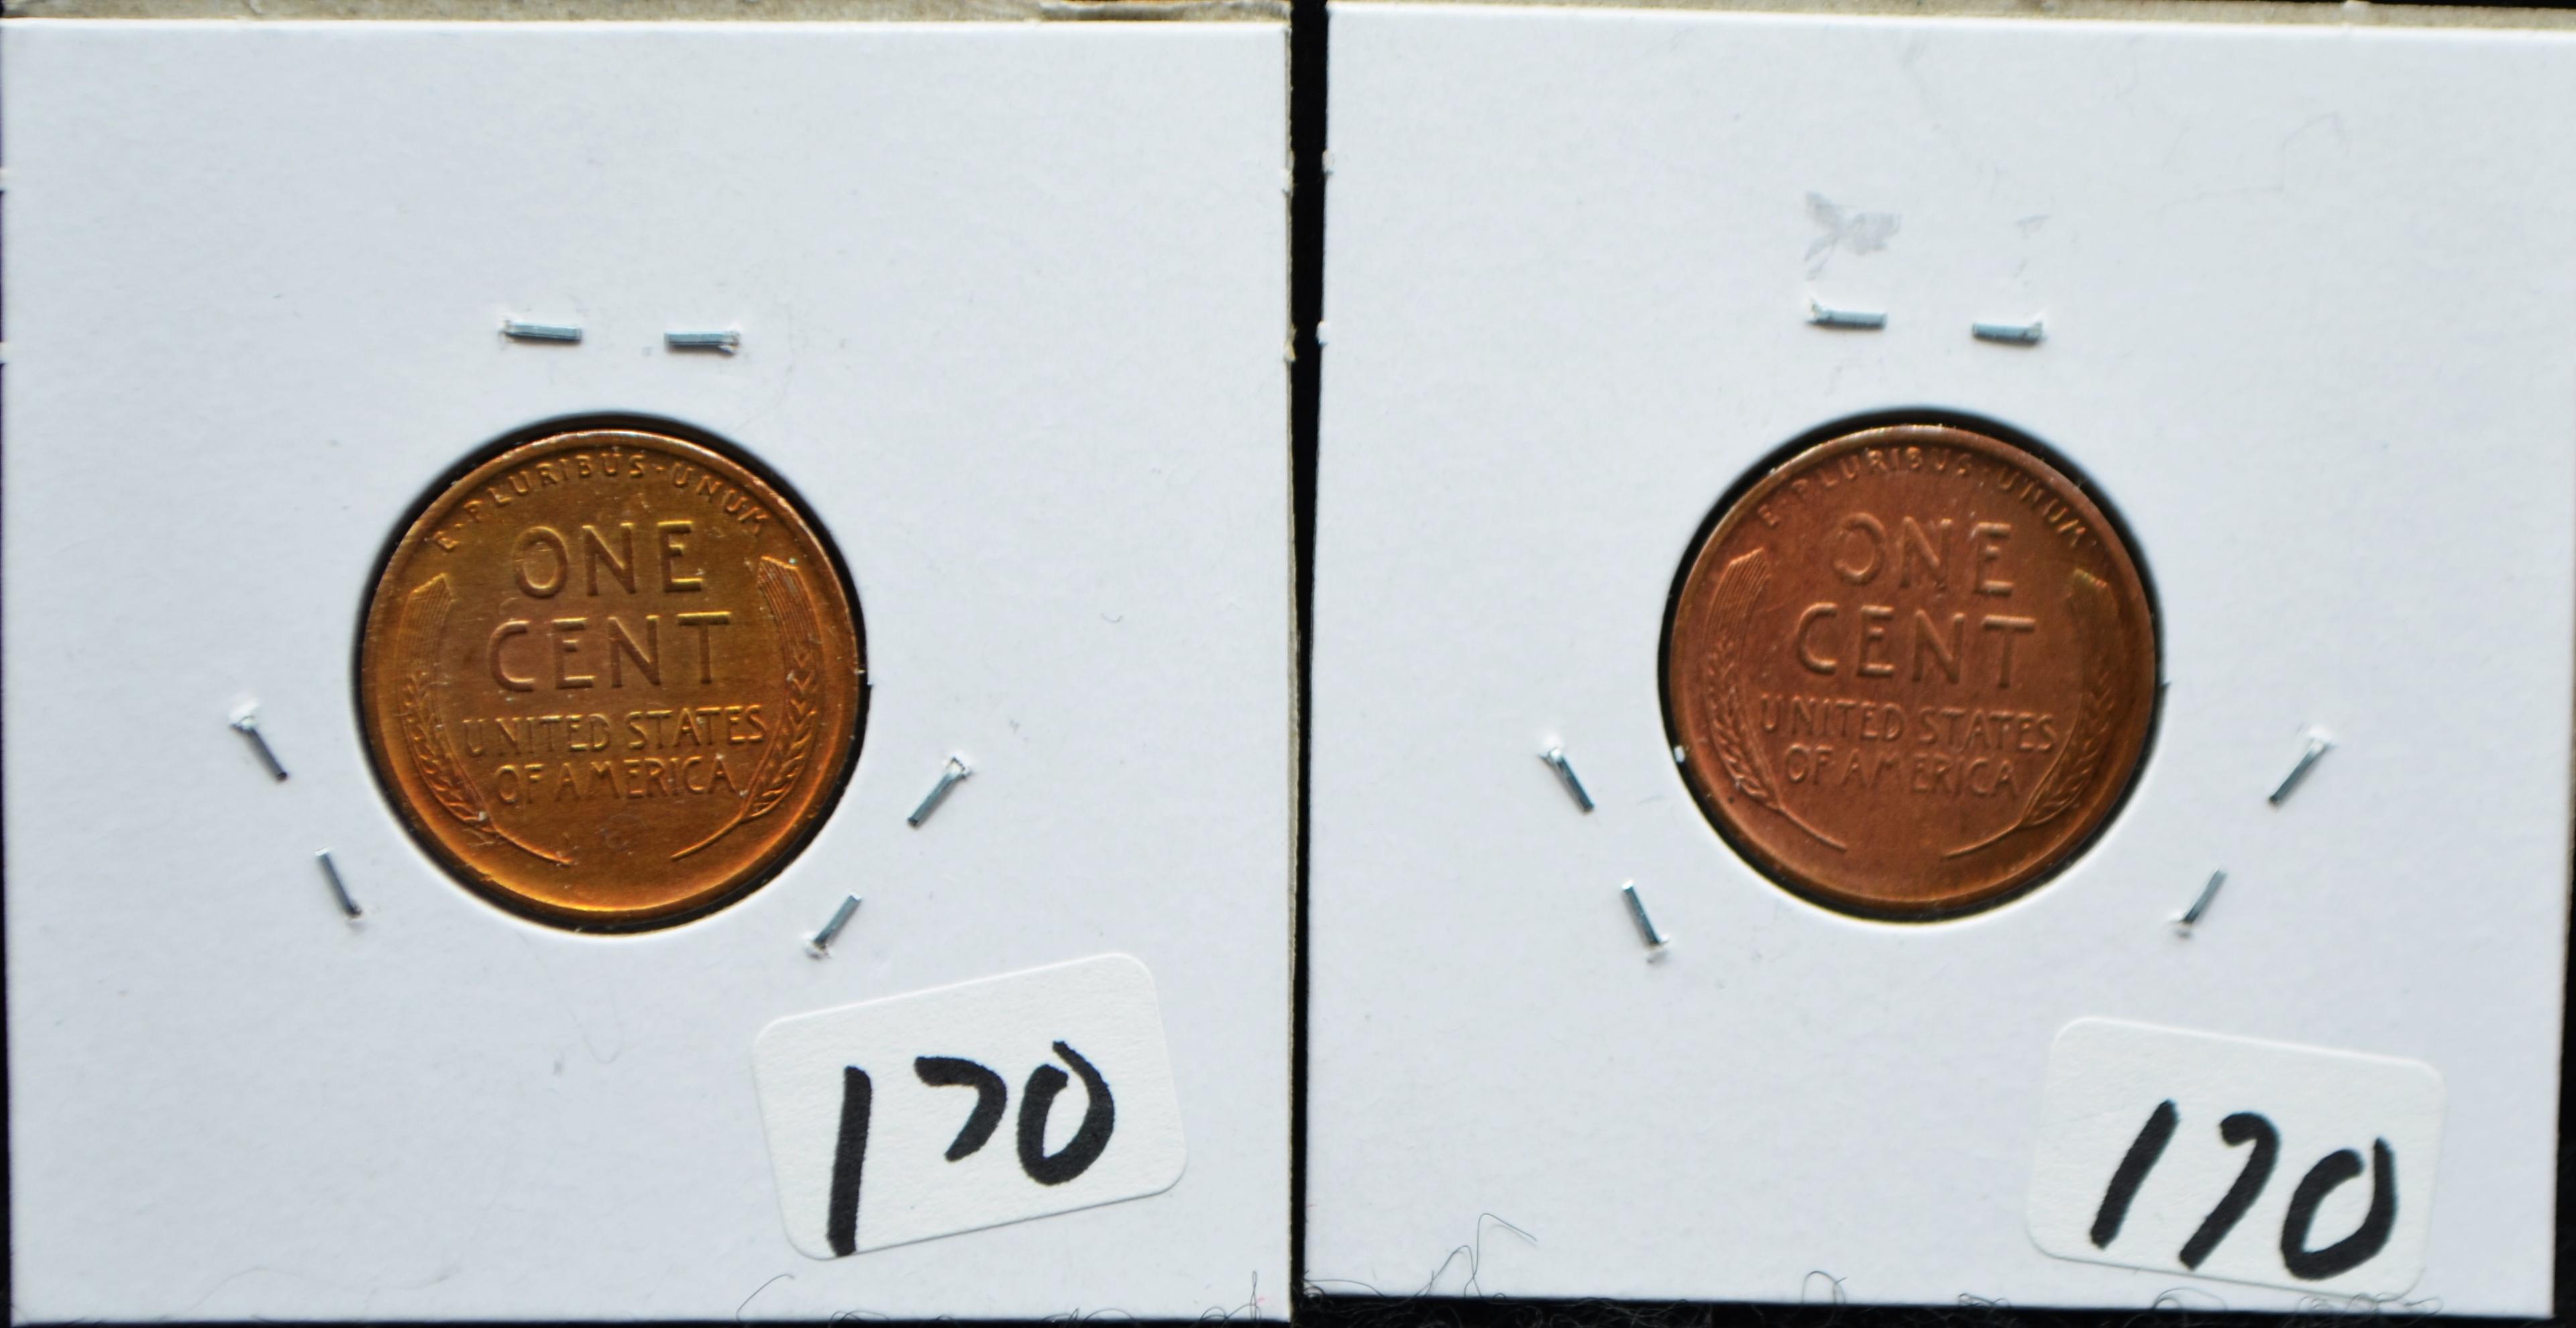 1921-S & 1923-S LINCOLN PENNIES (RED)